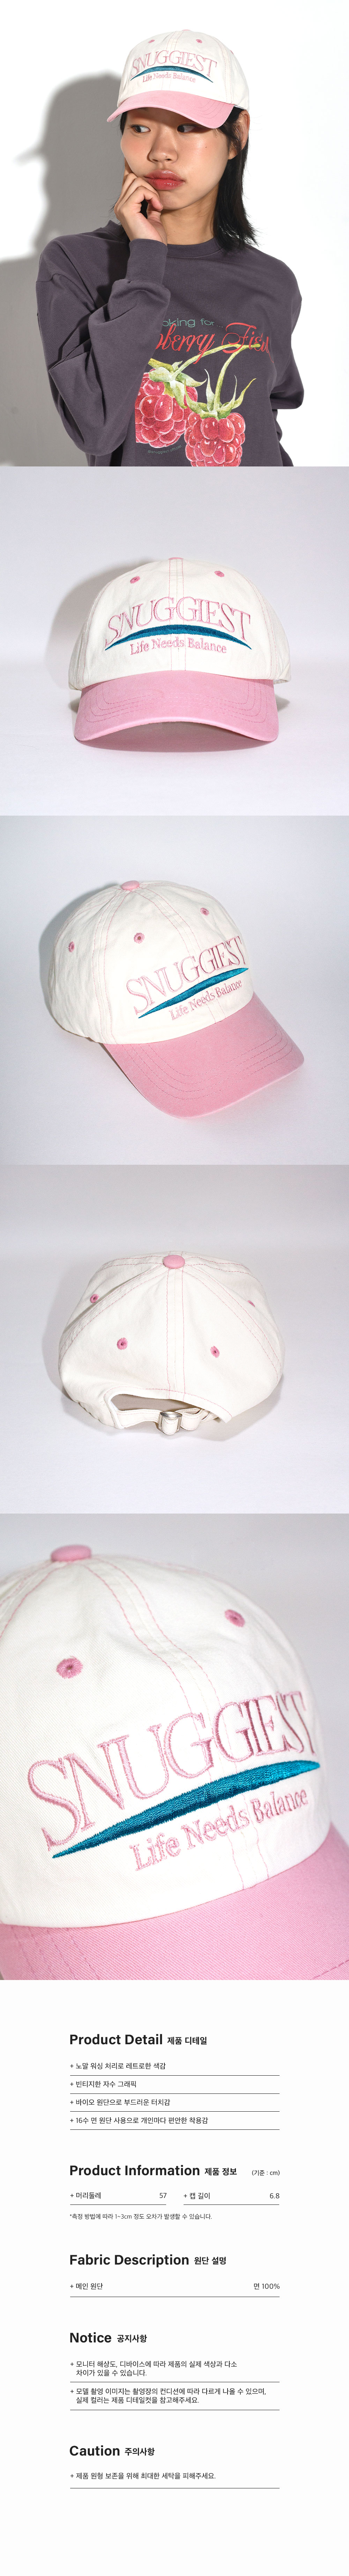 Snuggiest Washed Ball Cap - Pink